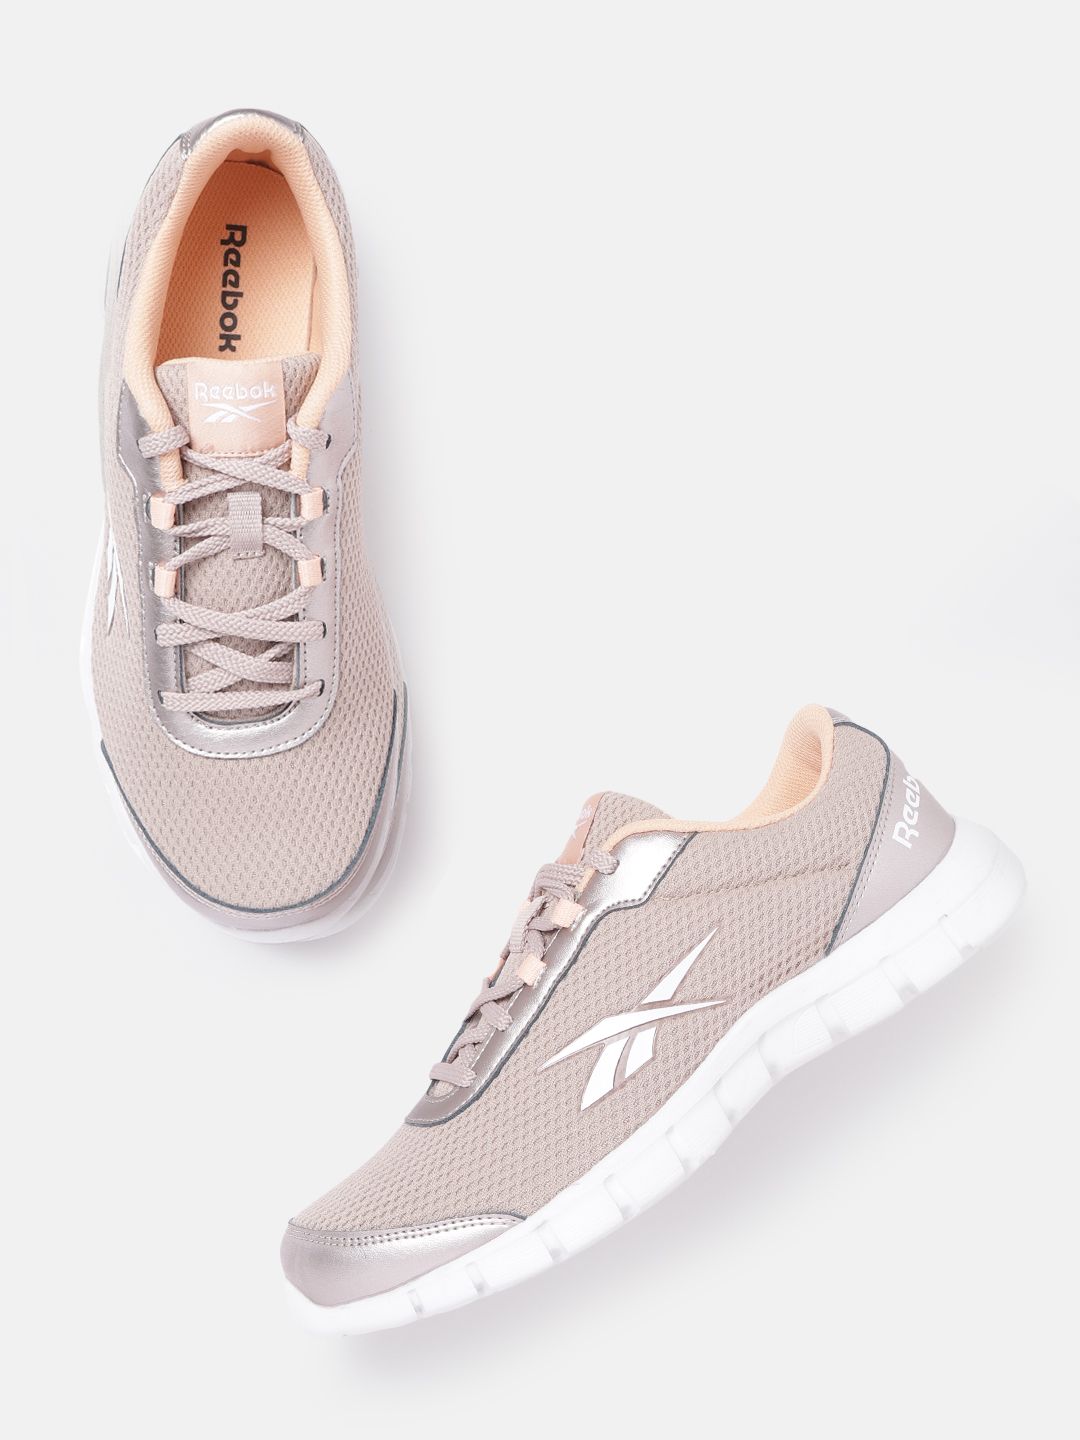 Reebok Women Peach-Coloured Woven Design Lux Running Shoes Price in India